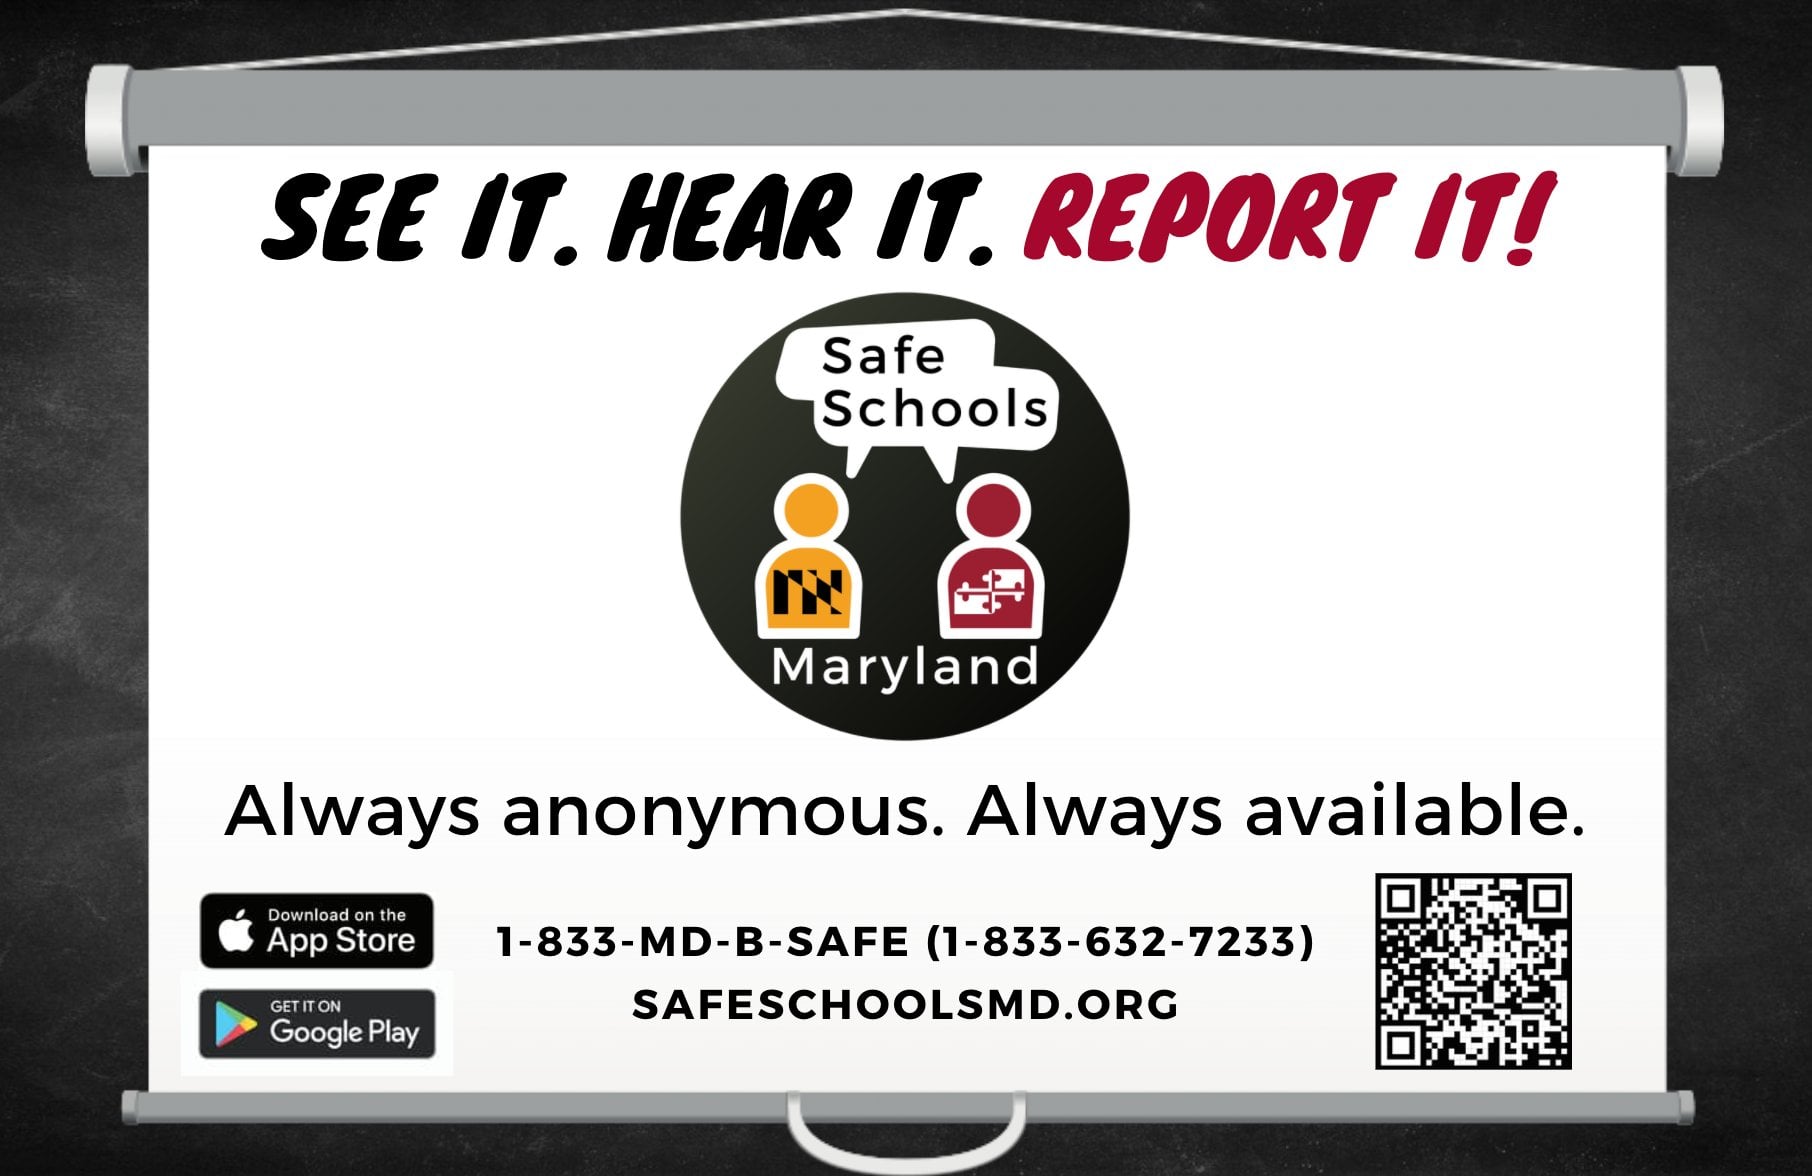 If You see or hear something suspicious, say something to an adult